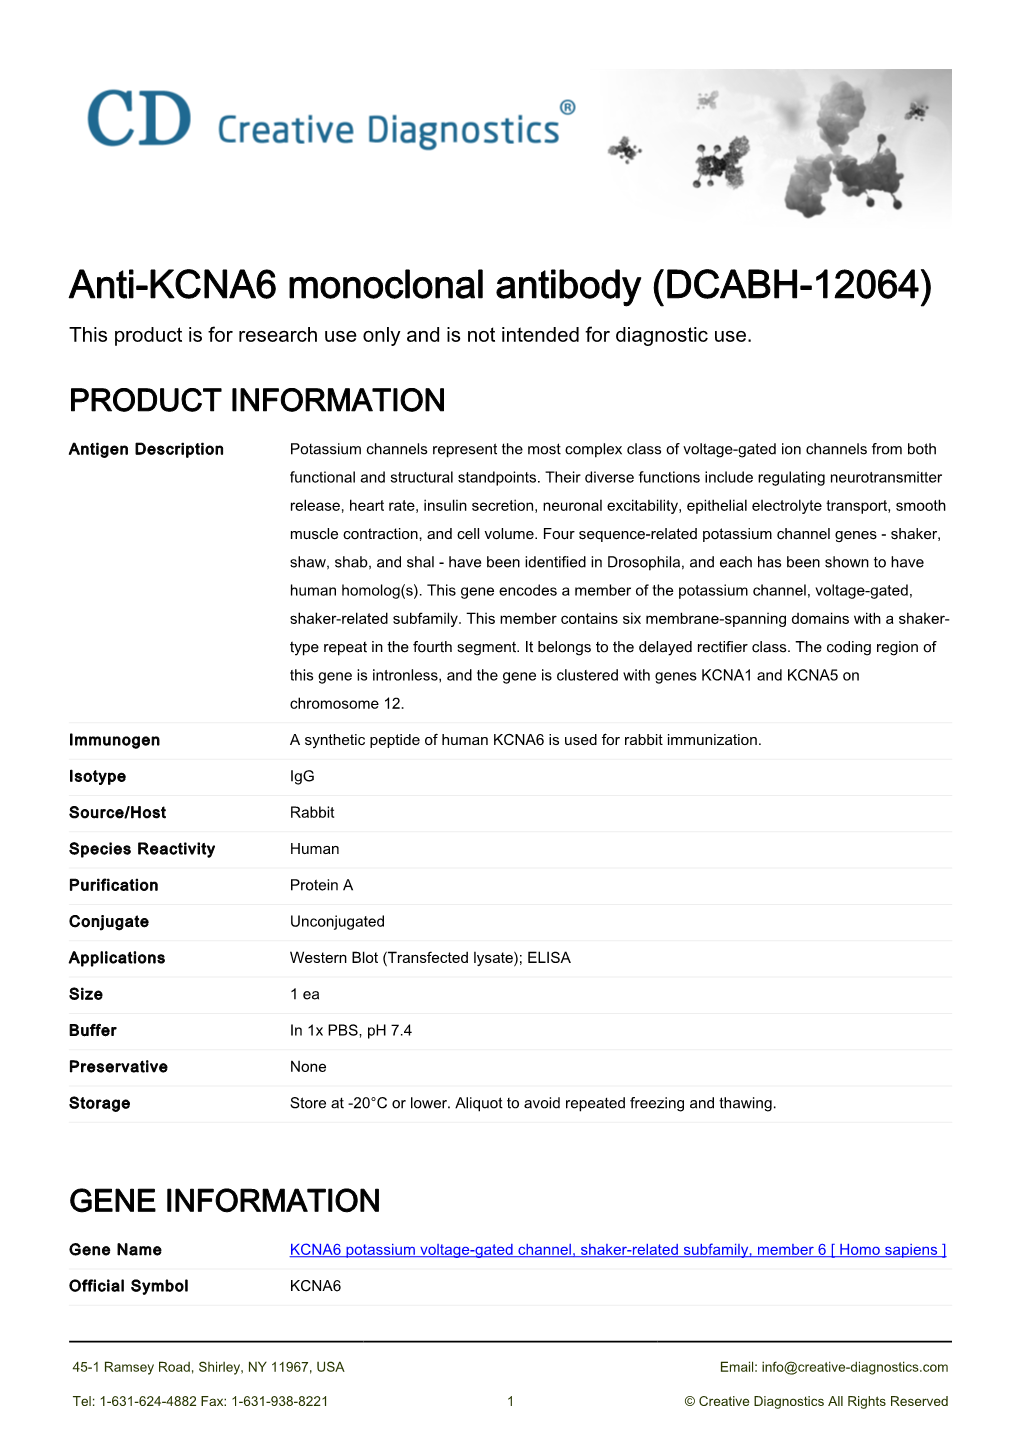 Anti-KCNA6 Monoclonal Antibody (DCABH-12064) This Product Is for Research Use Only and Is Not Intended for Diagnostic Use